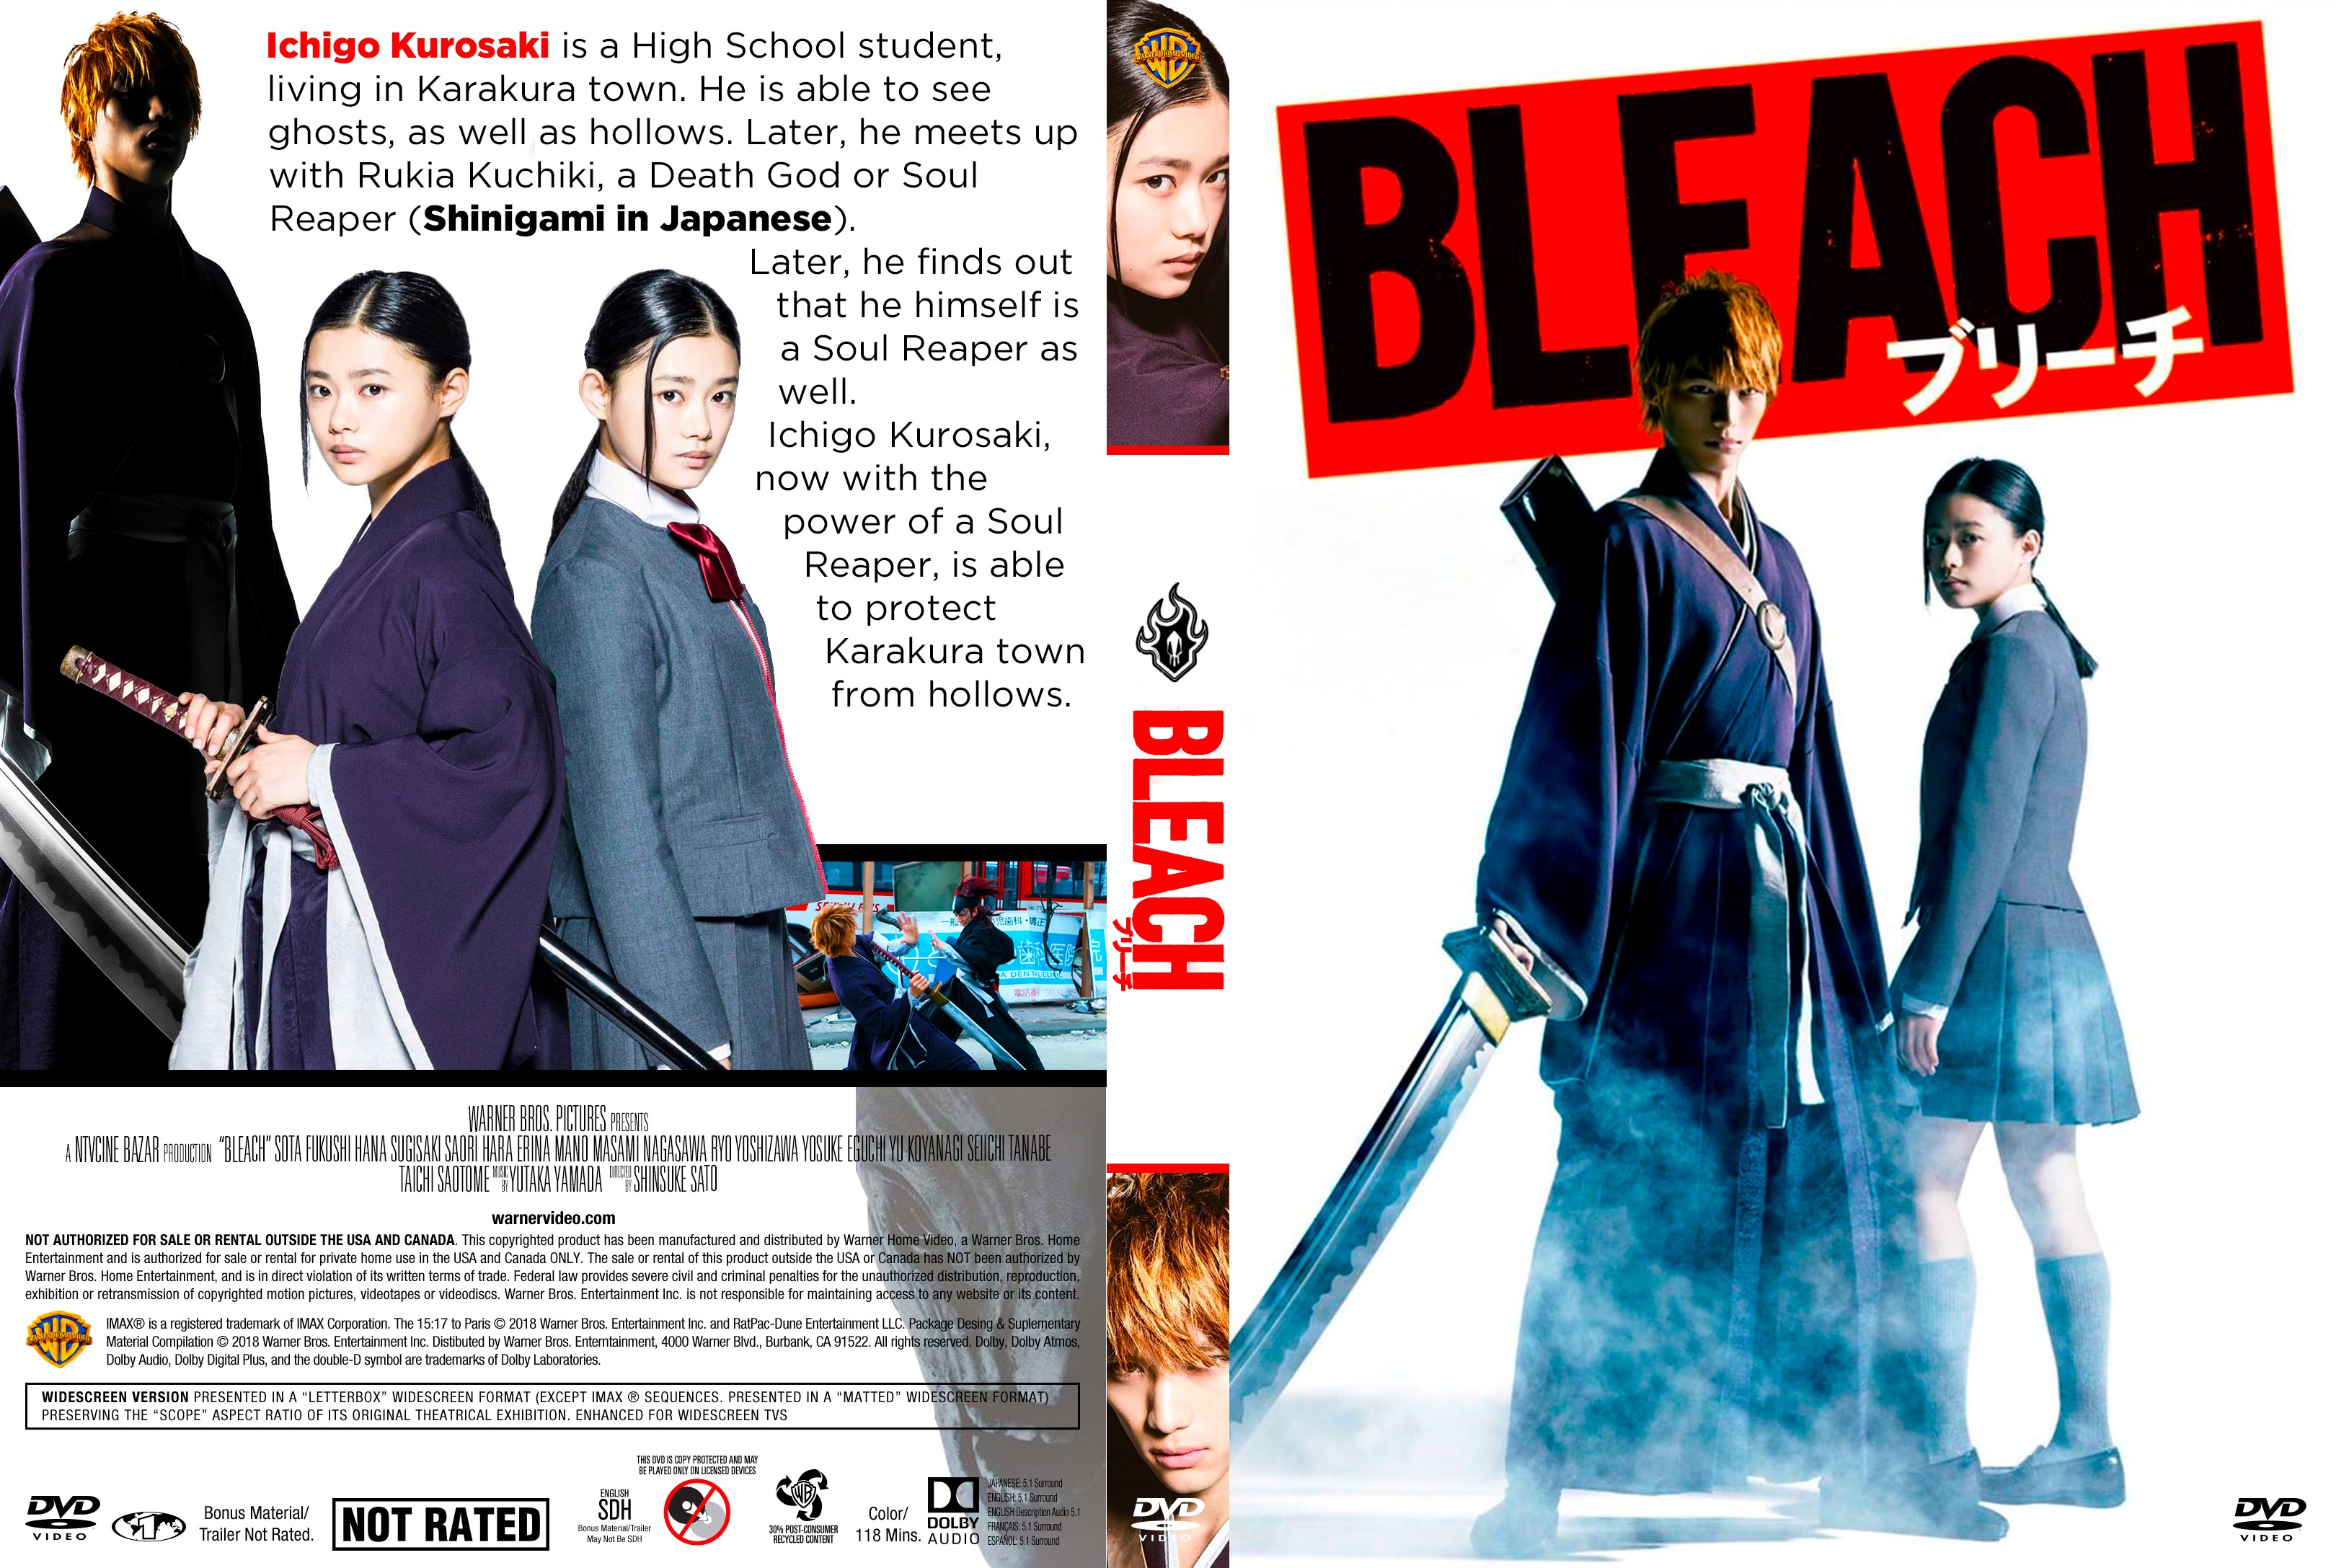 Bleach DVD Cover - Cover Addict - DVD, Bluray Covers and 